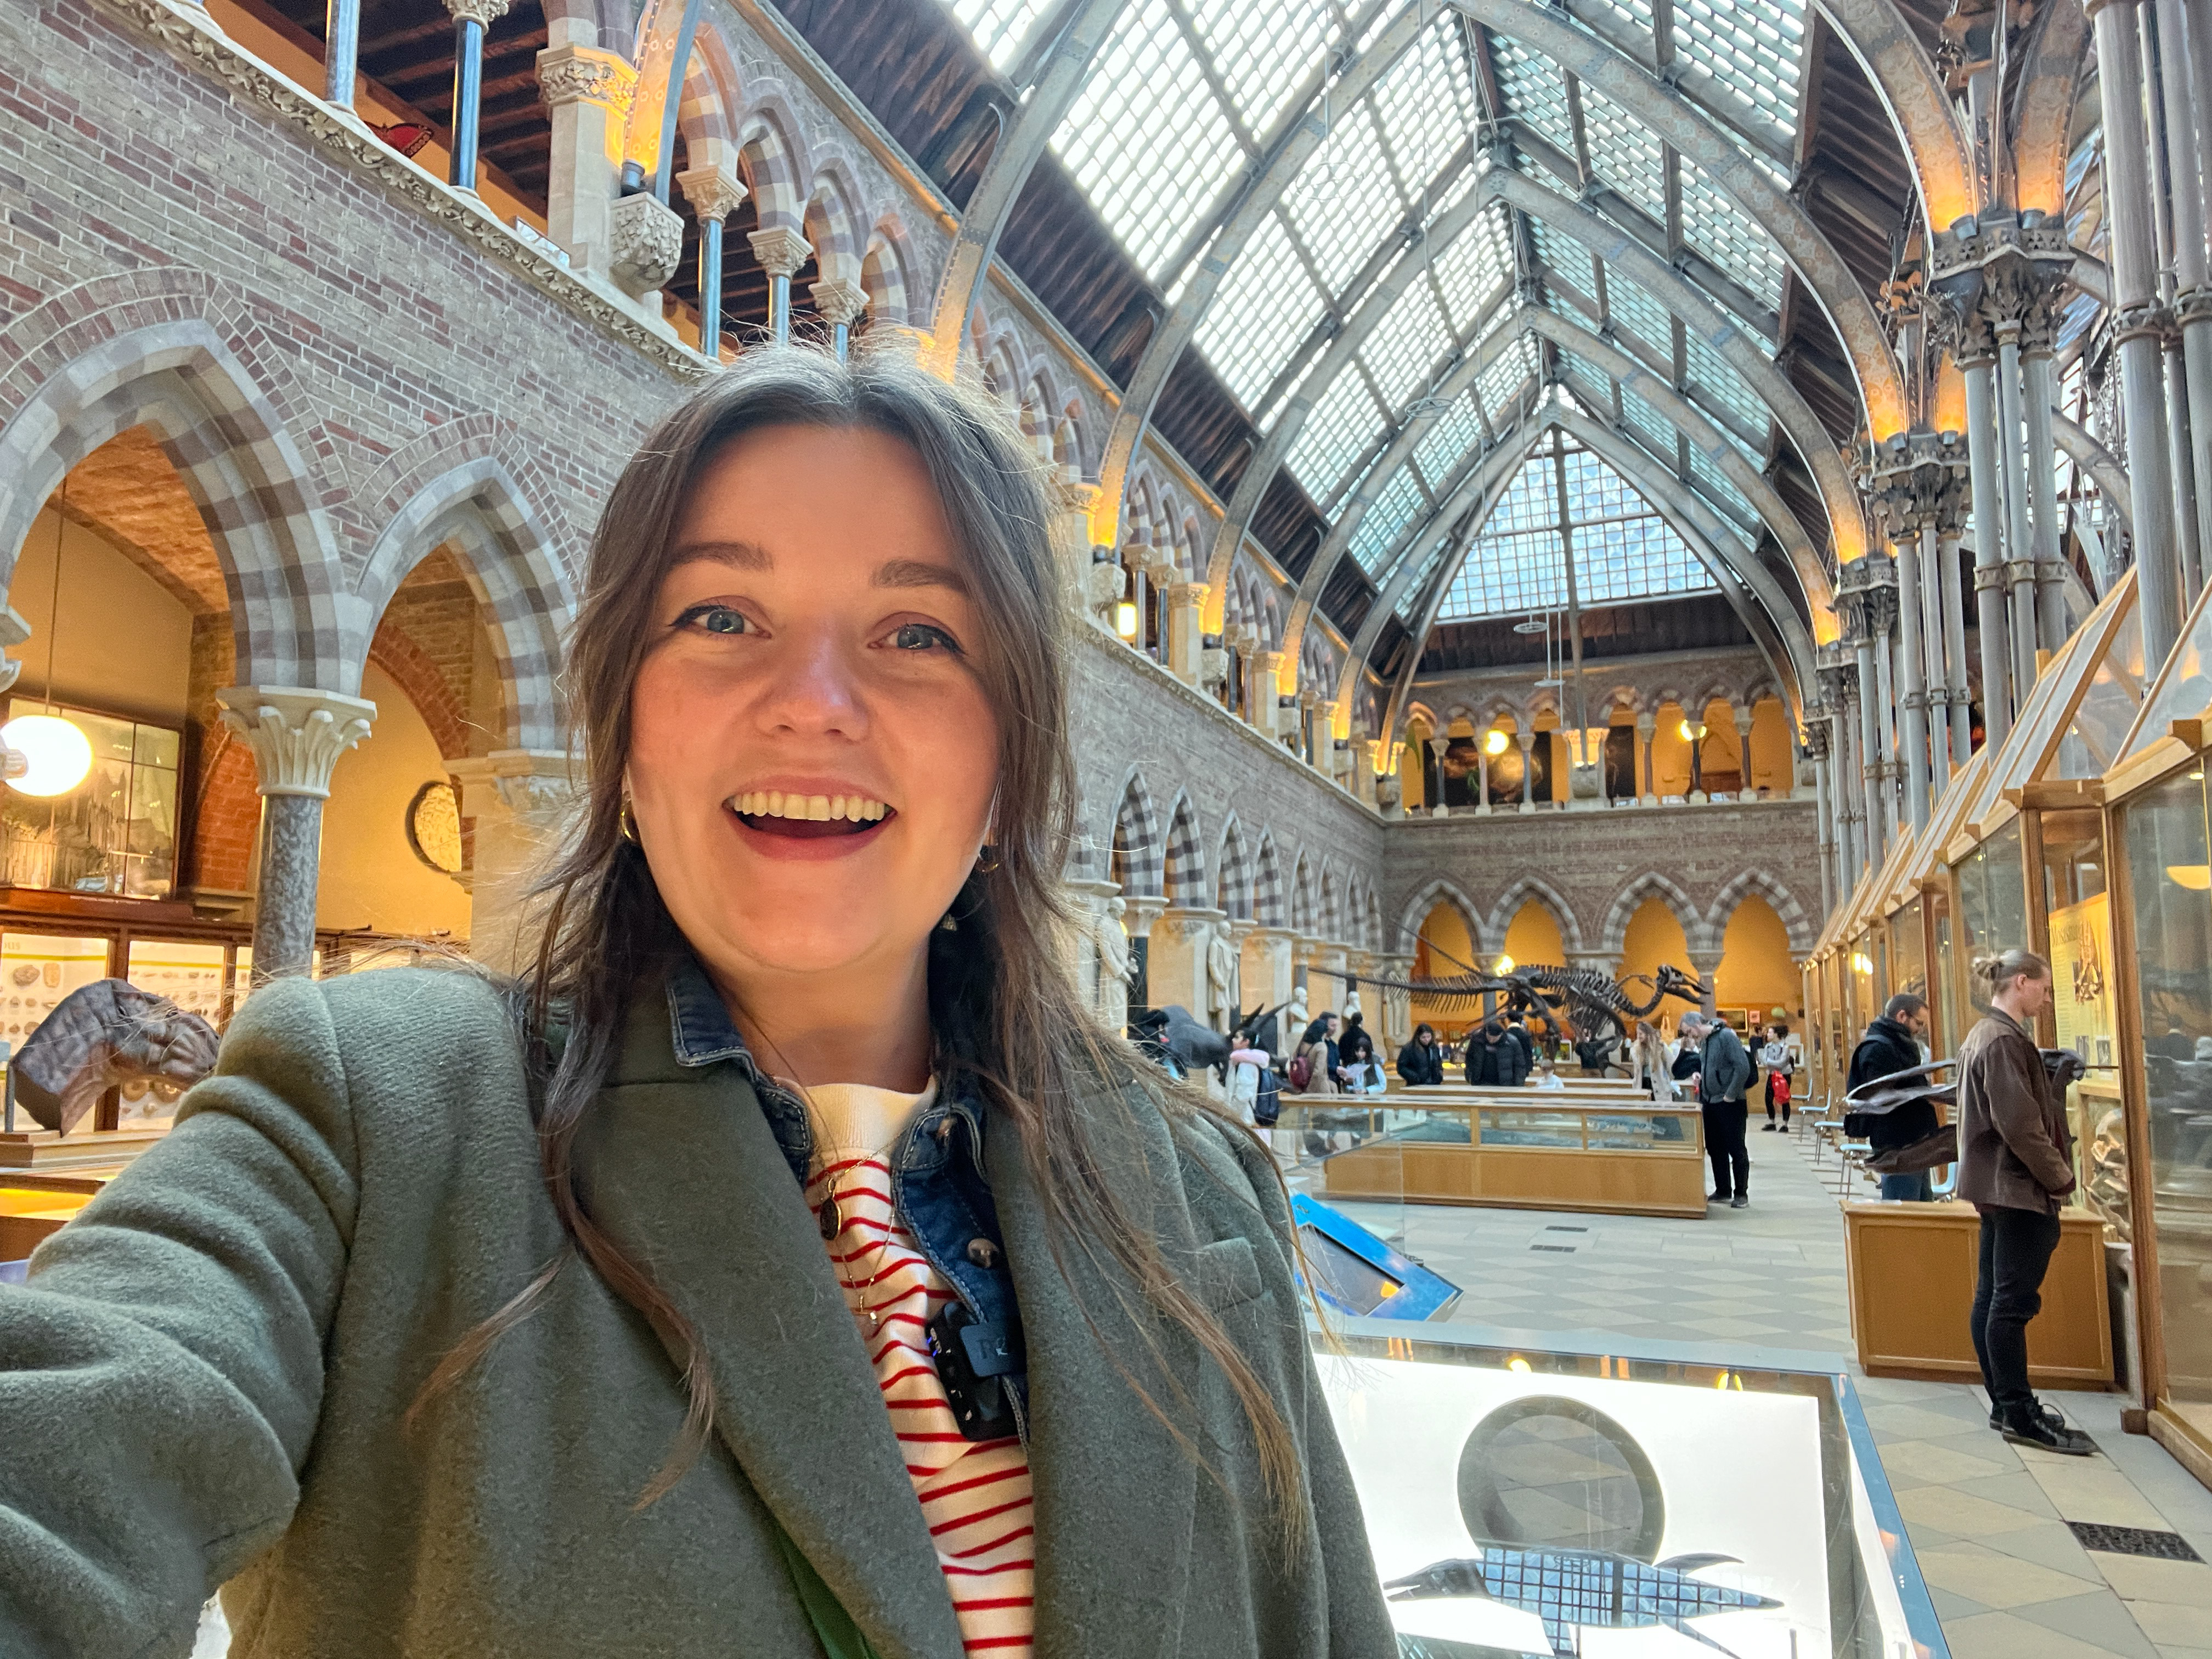 A  smiling woman takes a selfie in the Neo-gothic interior of the University of Oxford Natural History Museum